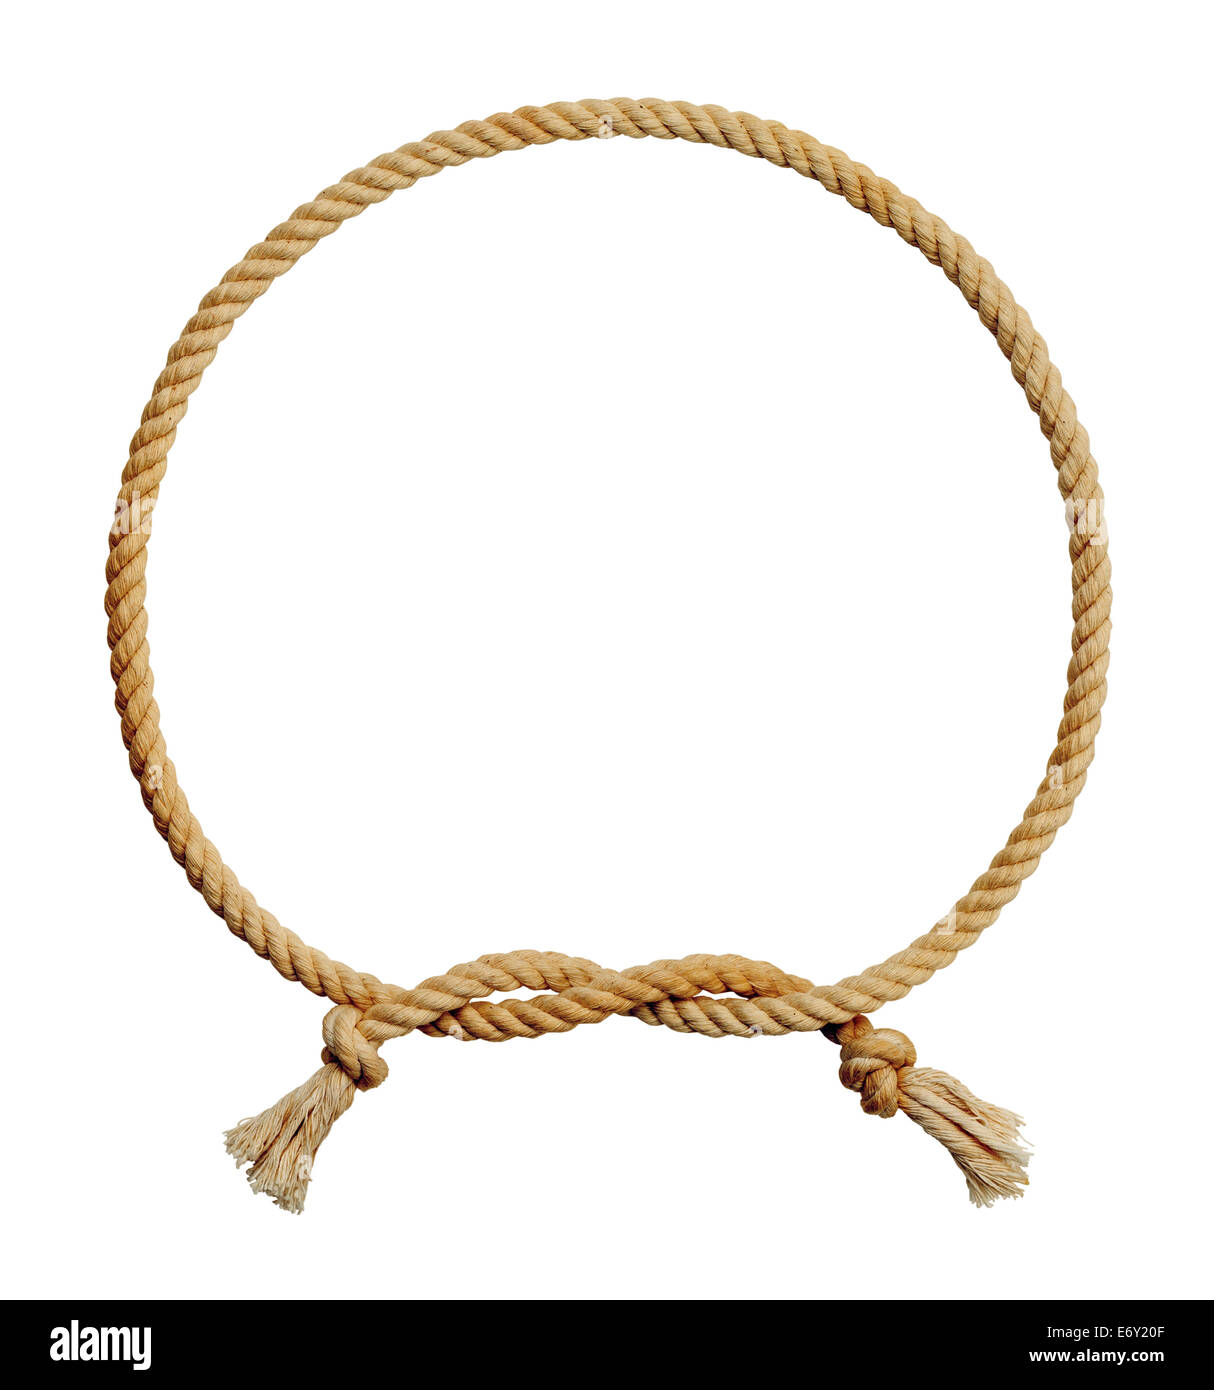 Old Dirty Rope Circle Frame Isolated on White Background. Stock Photo